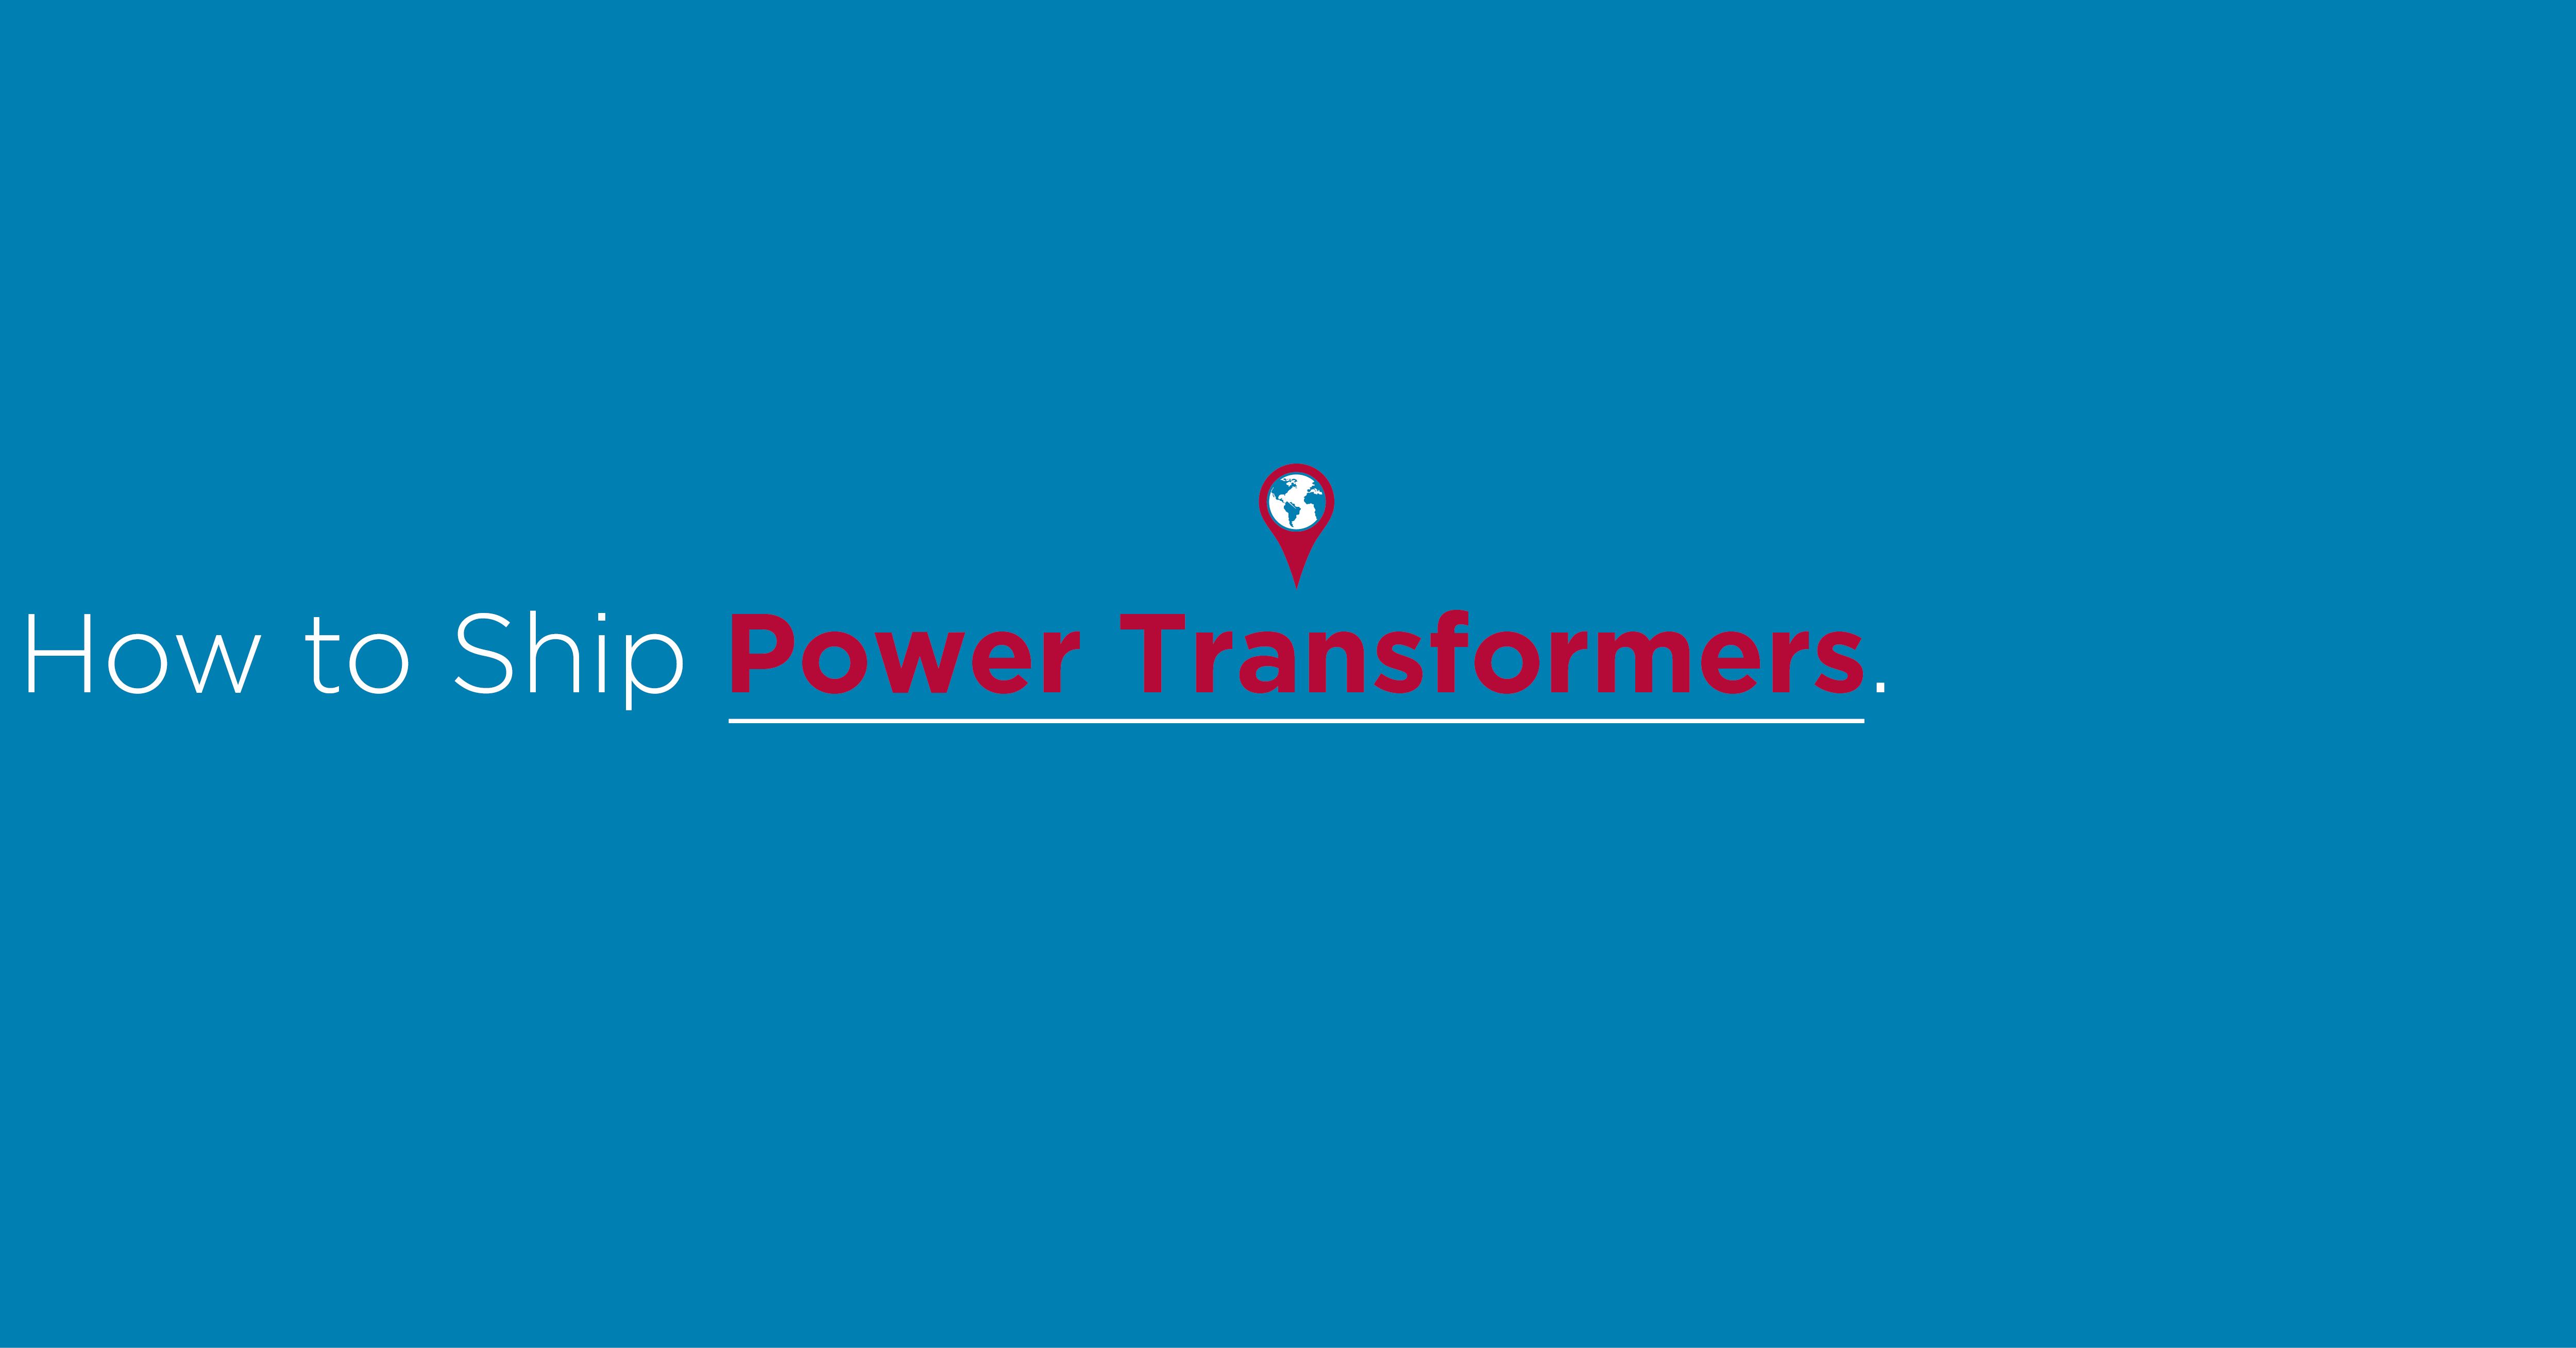 How to Ship Power Transformers